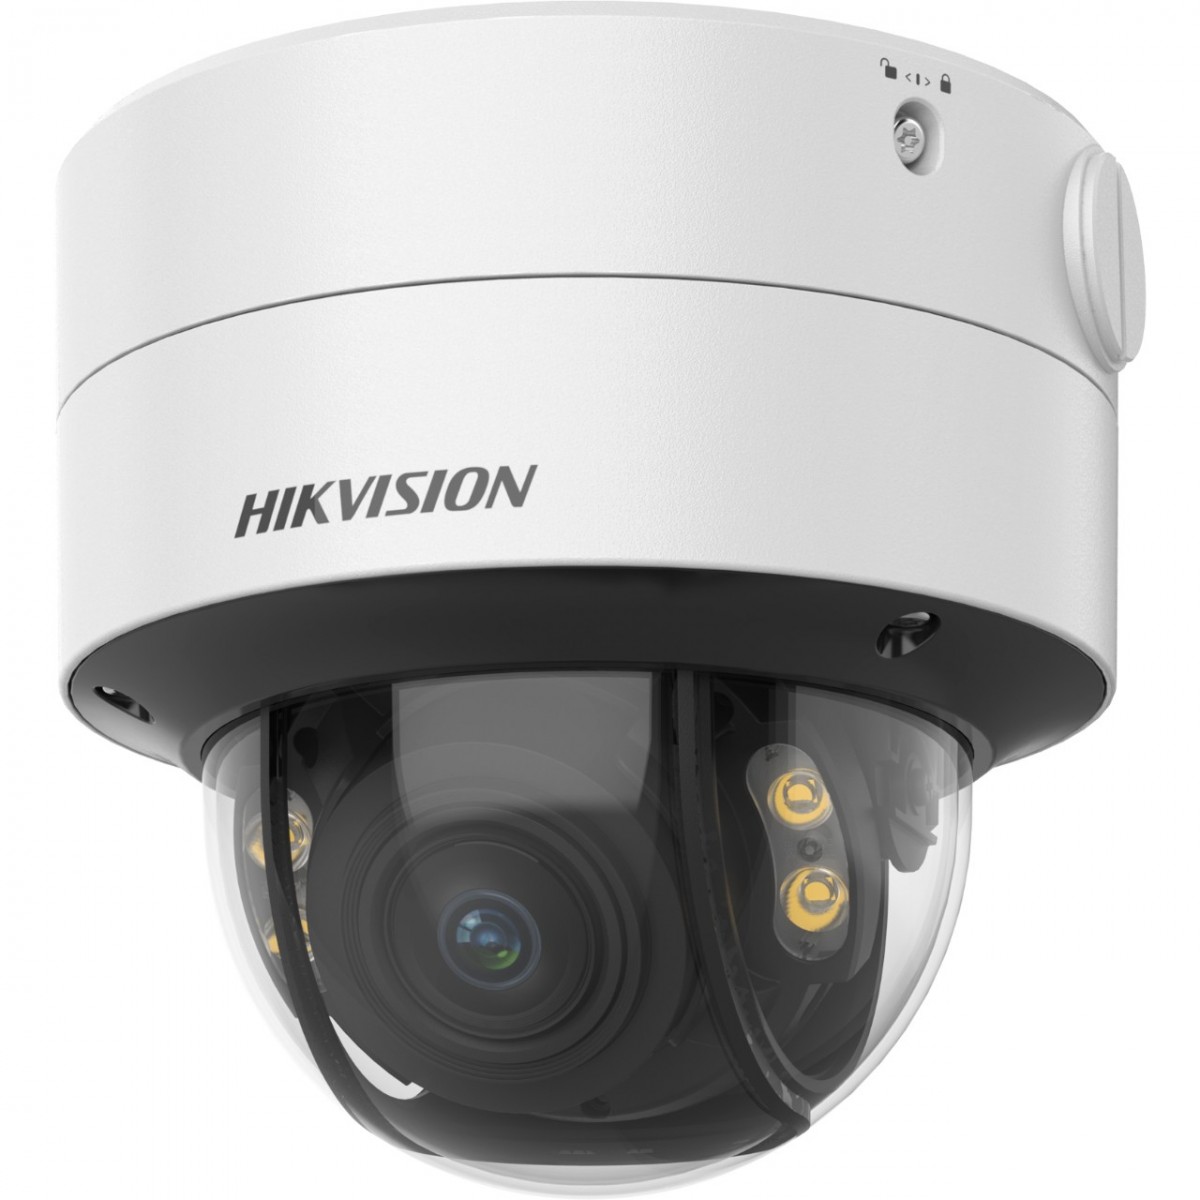 Hikvision DS-2CE59DF8T-AVPZE(2.8-12MM)(O - English - Dome - Ceiling-wall - White - Metal - Dust resistant - Water resistant